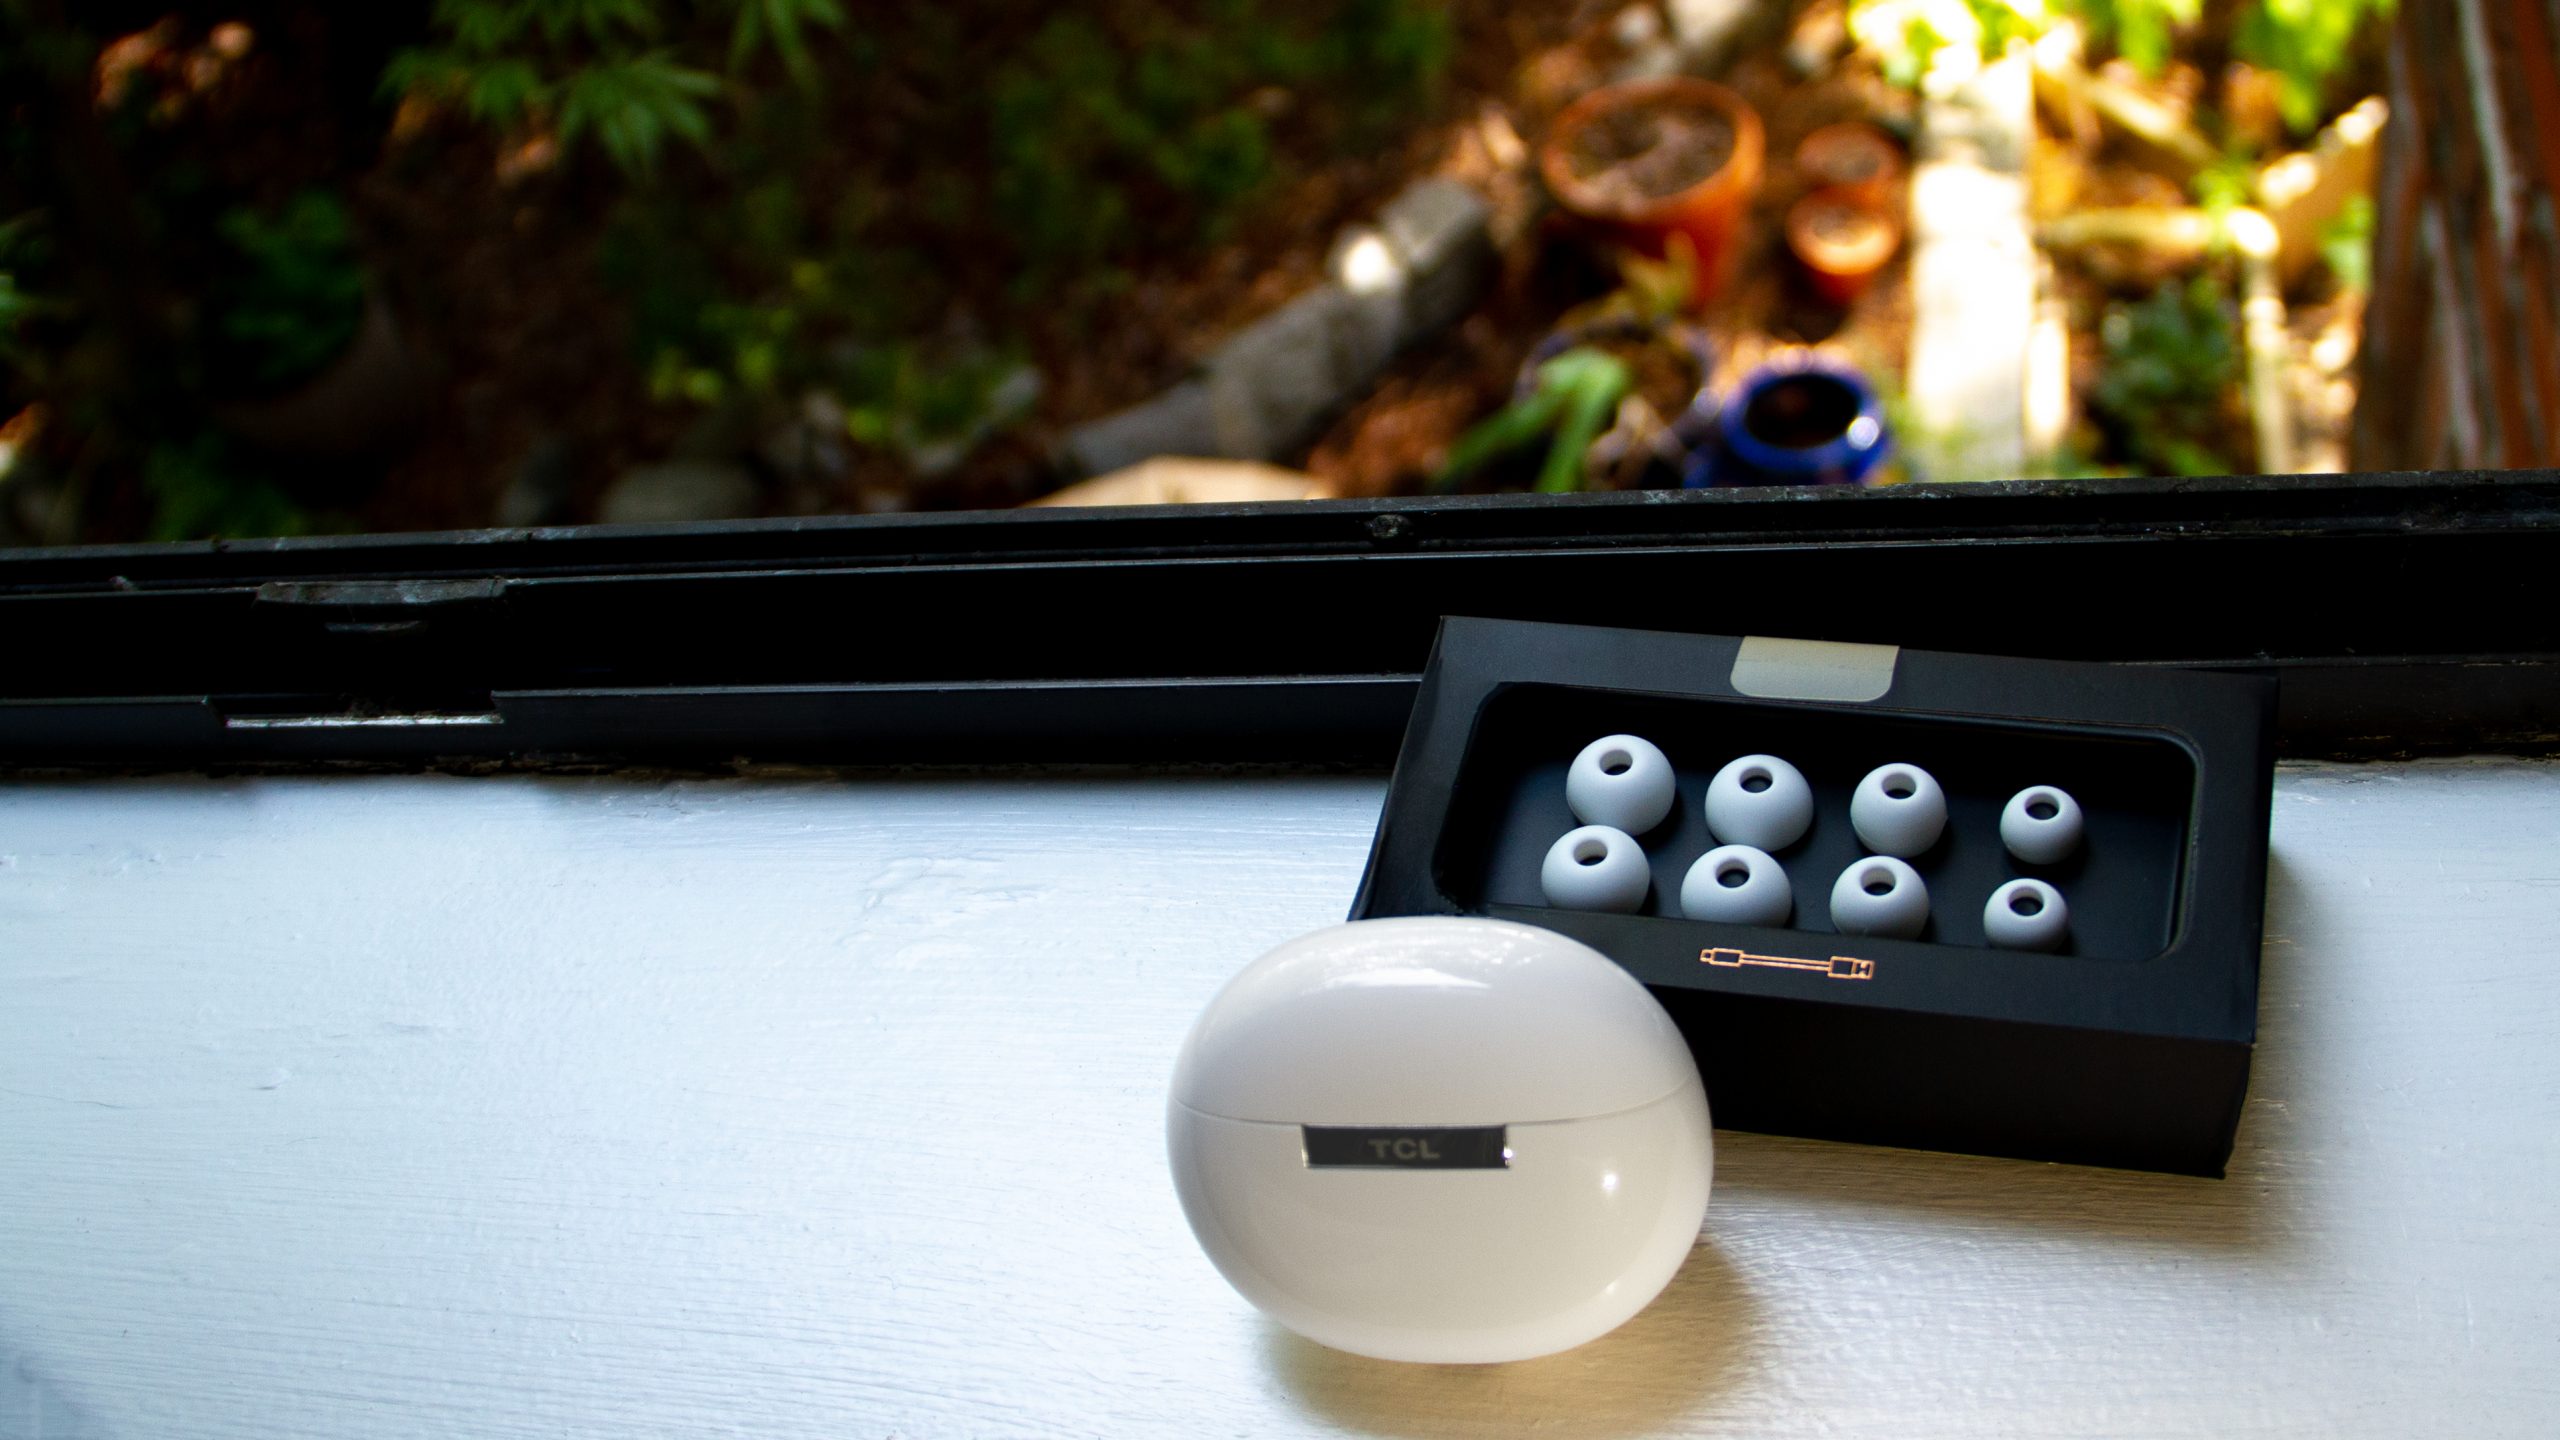 The TCL MOVEAUDIO S600 case and four additional silicone ear tips sit on a white window sill with a blurred garden in the background.